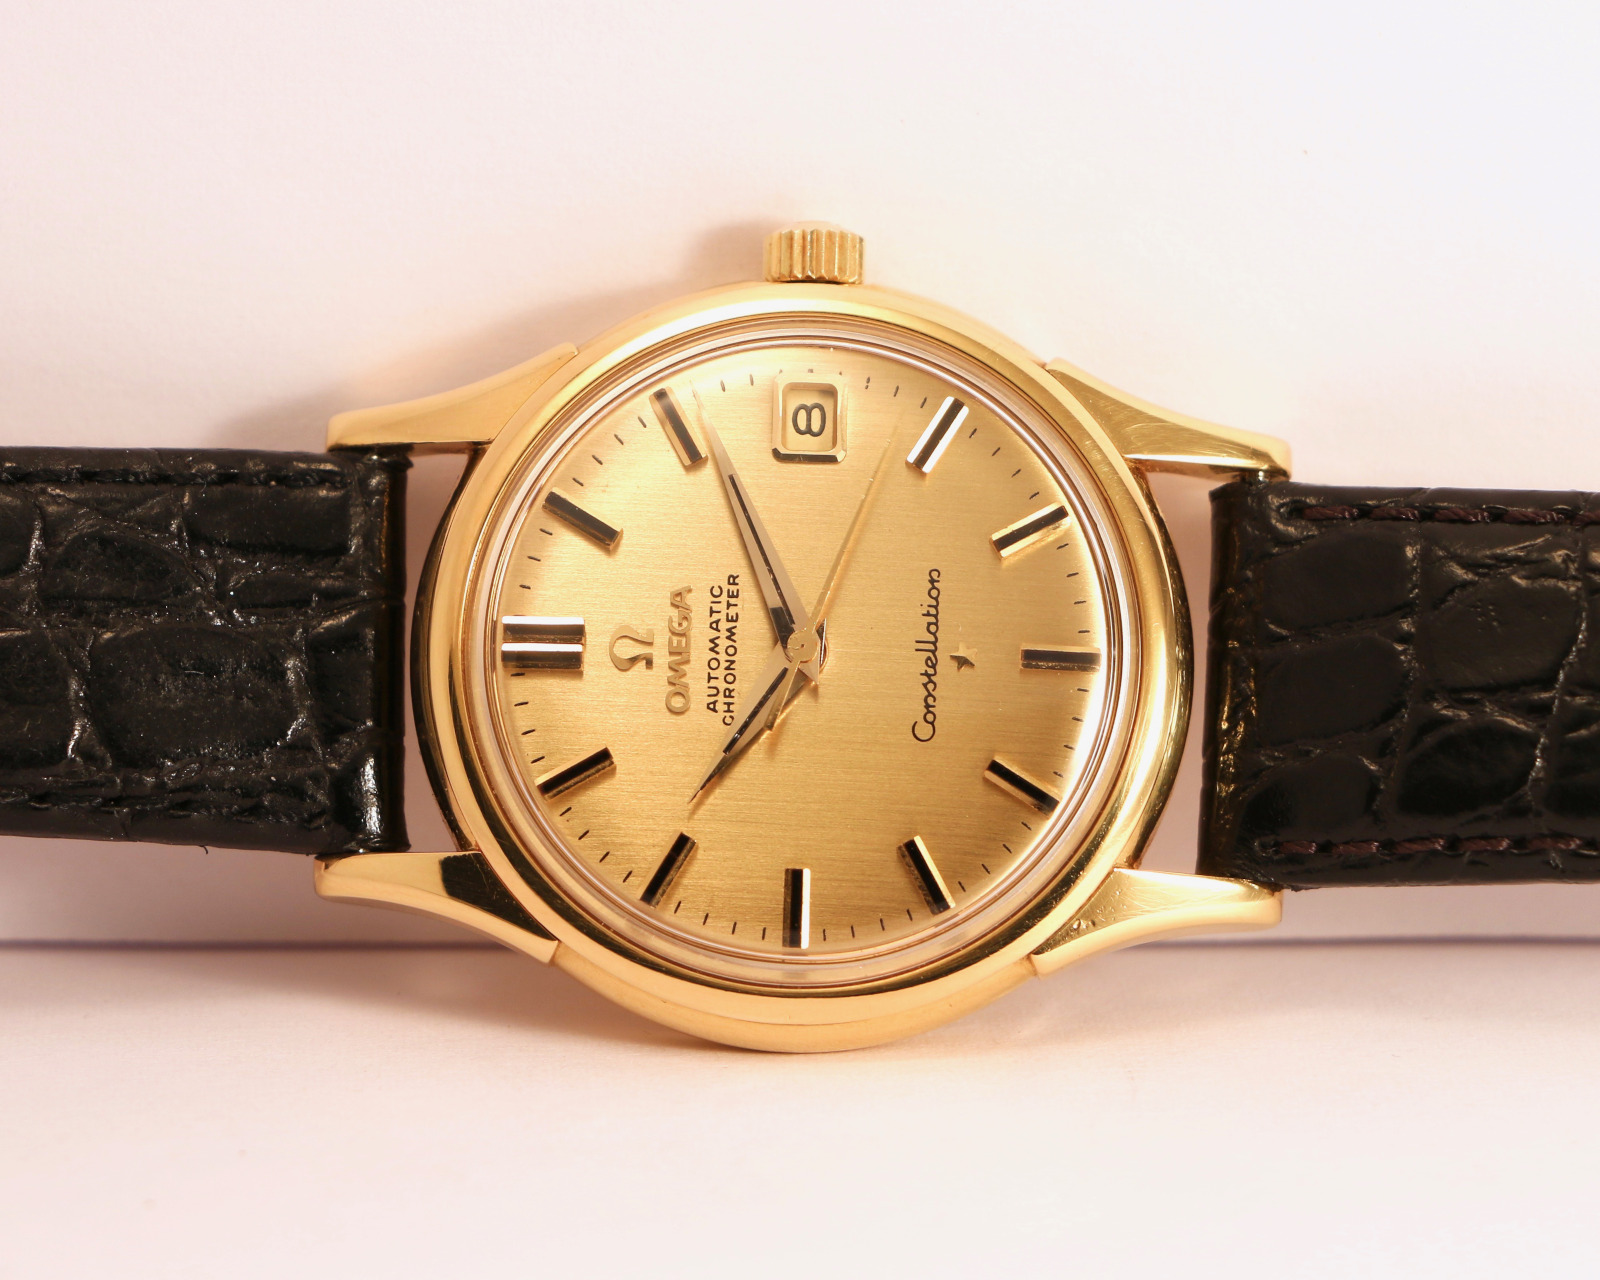 Omega Constellation “De Luxe” 18K yellow gold ref. 14393 fully serviced ...